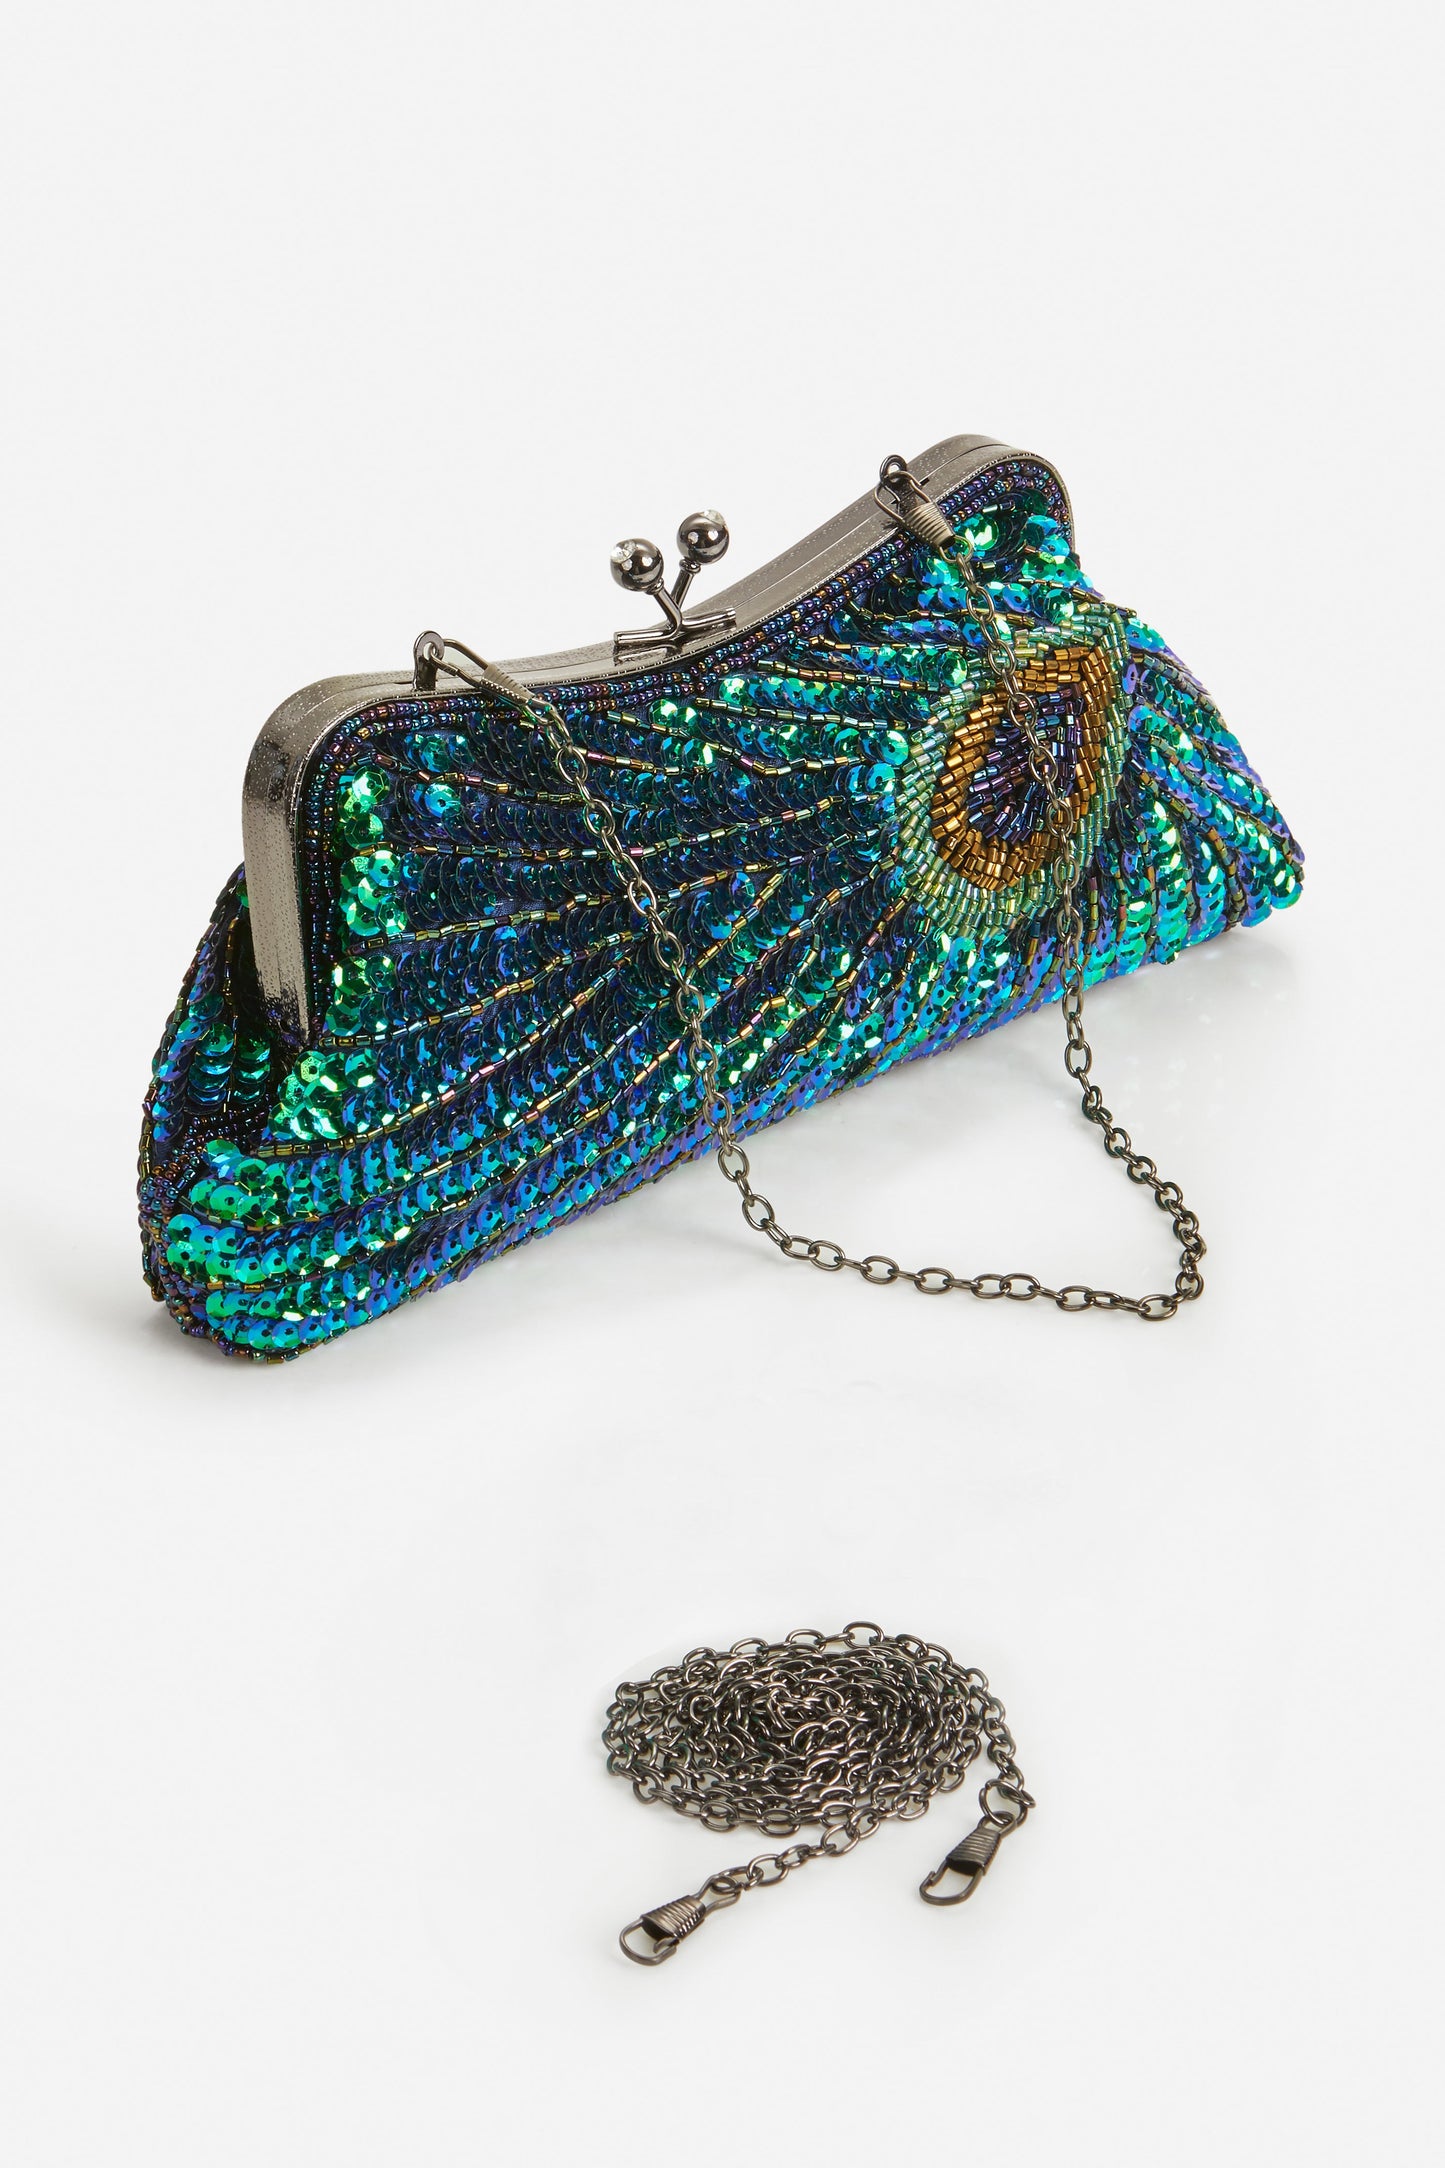 1920s Flapper Peacock Sequined Clutch